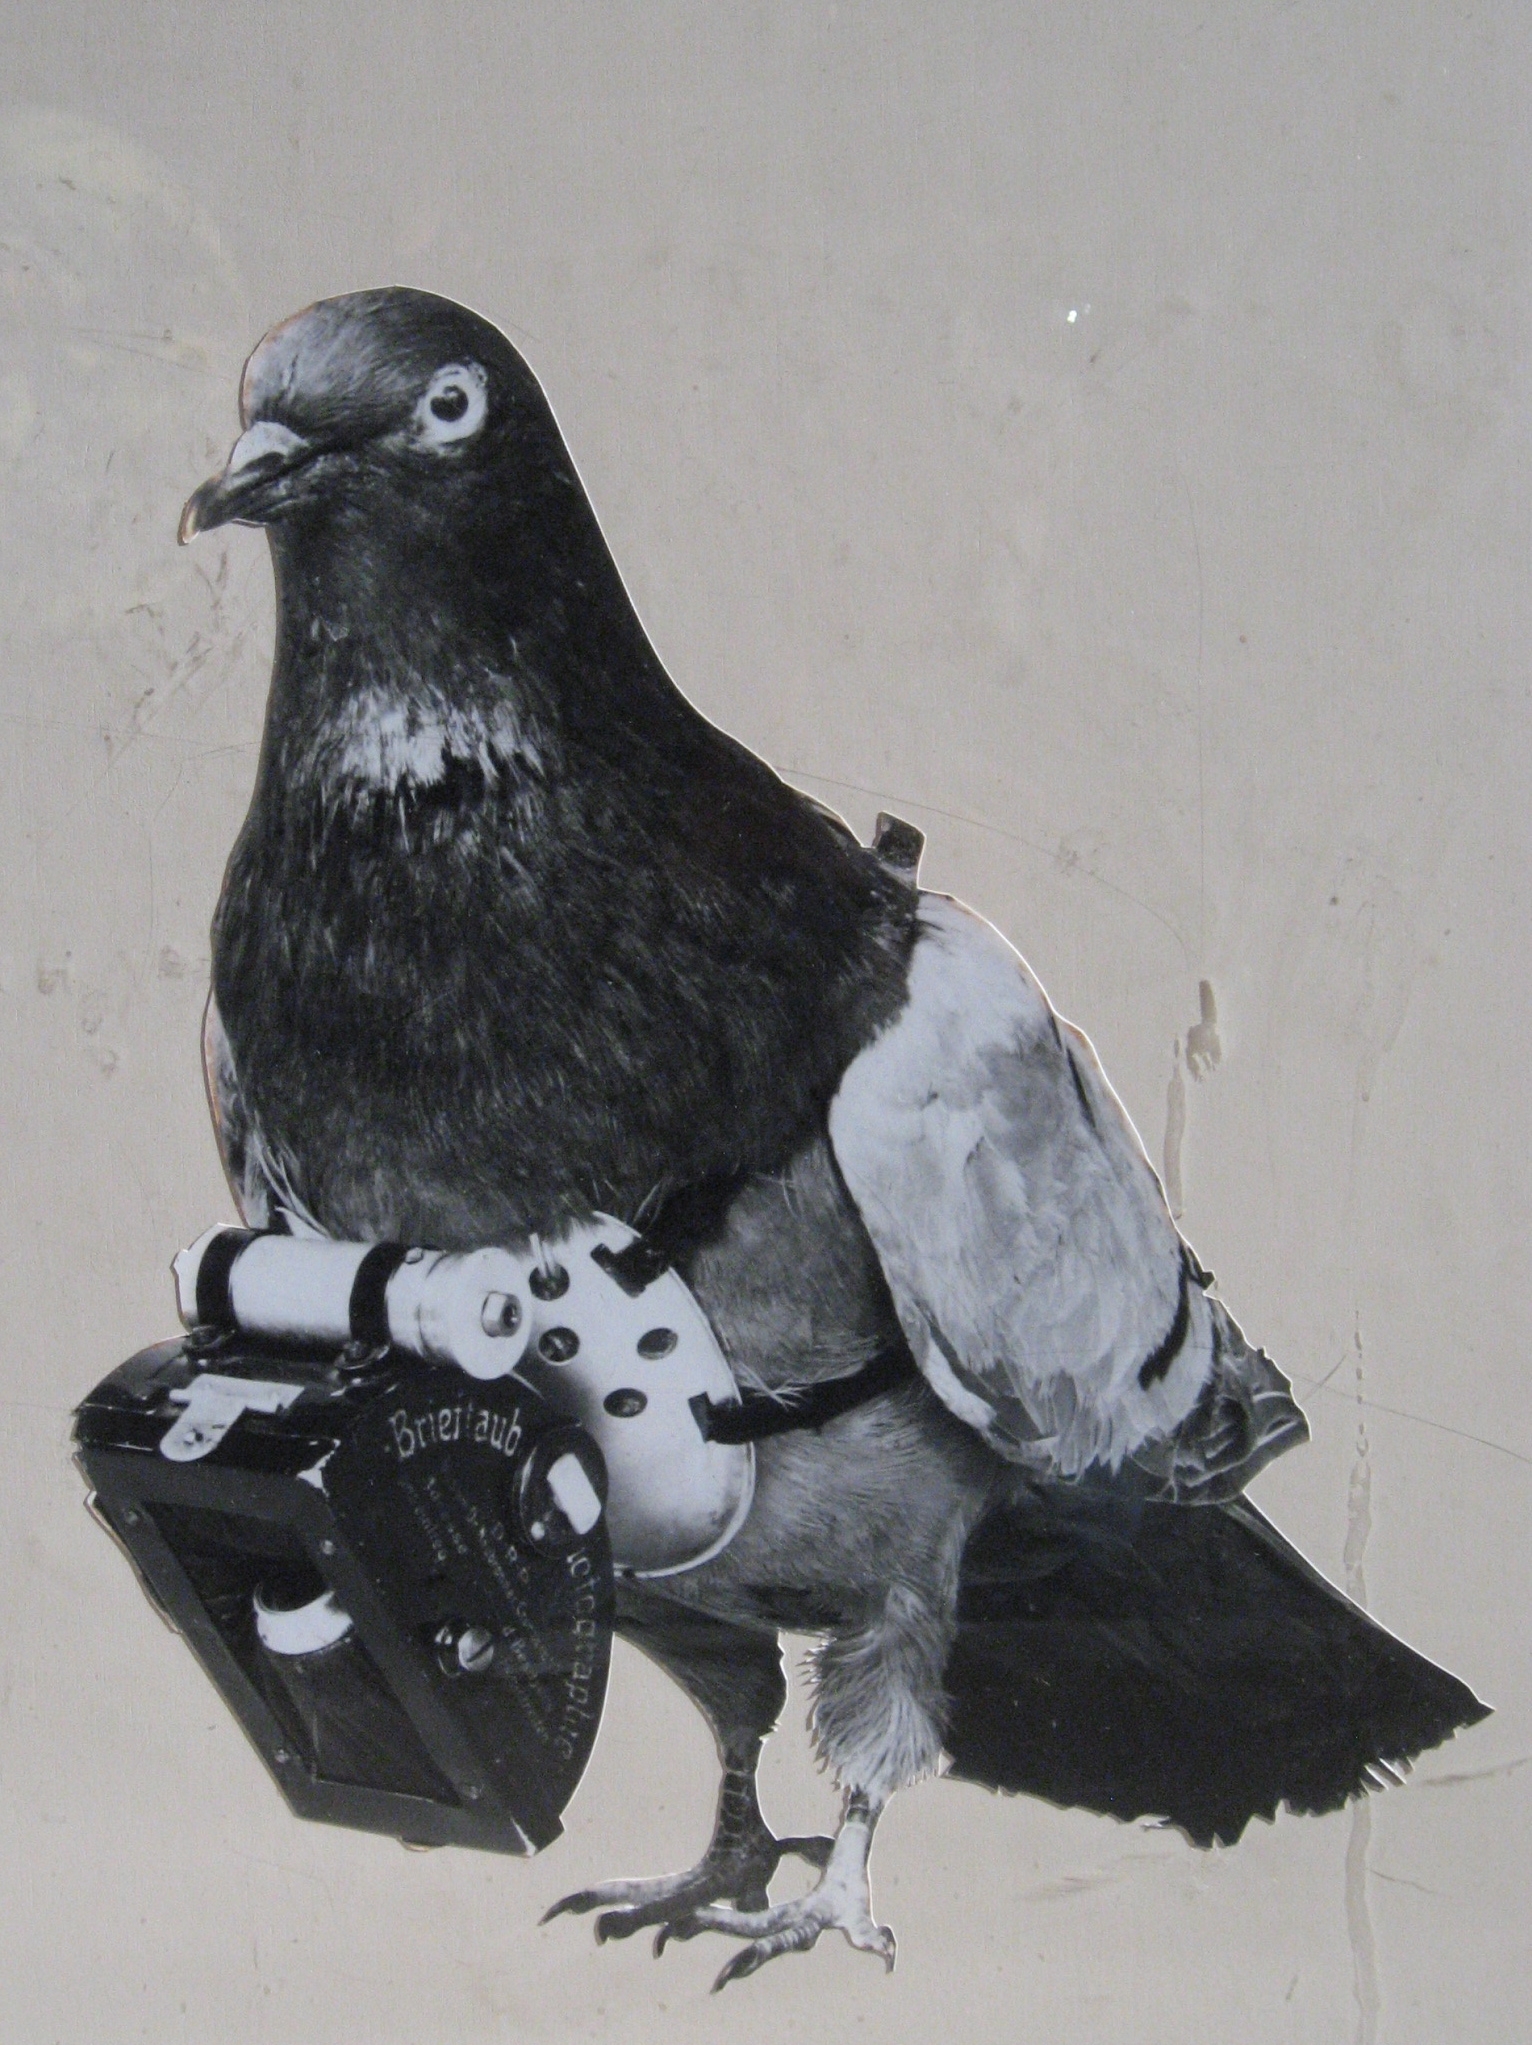 Dr. Julius Neubronner patented a miniature pigeon camera activated by a timing mechanism 1903